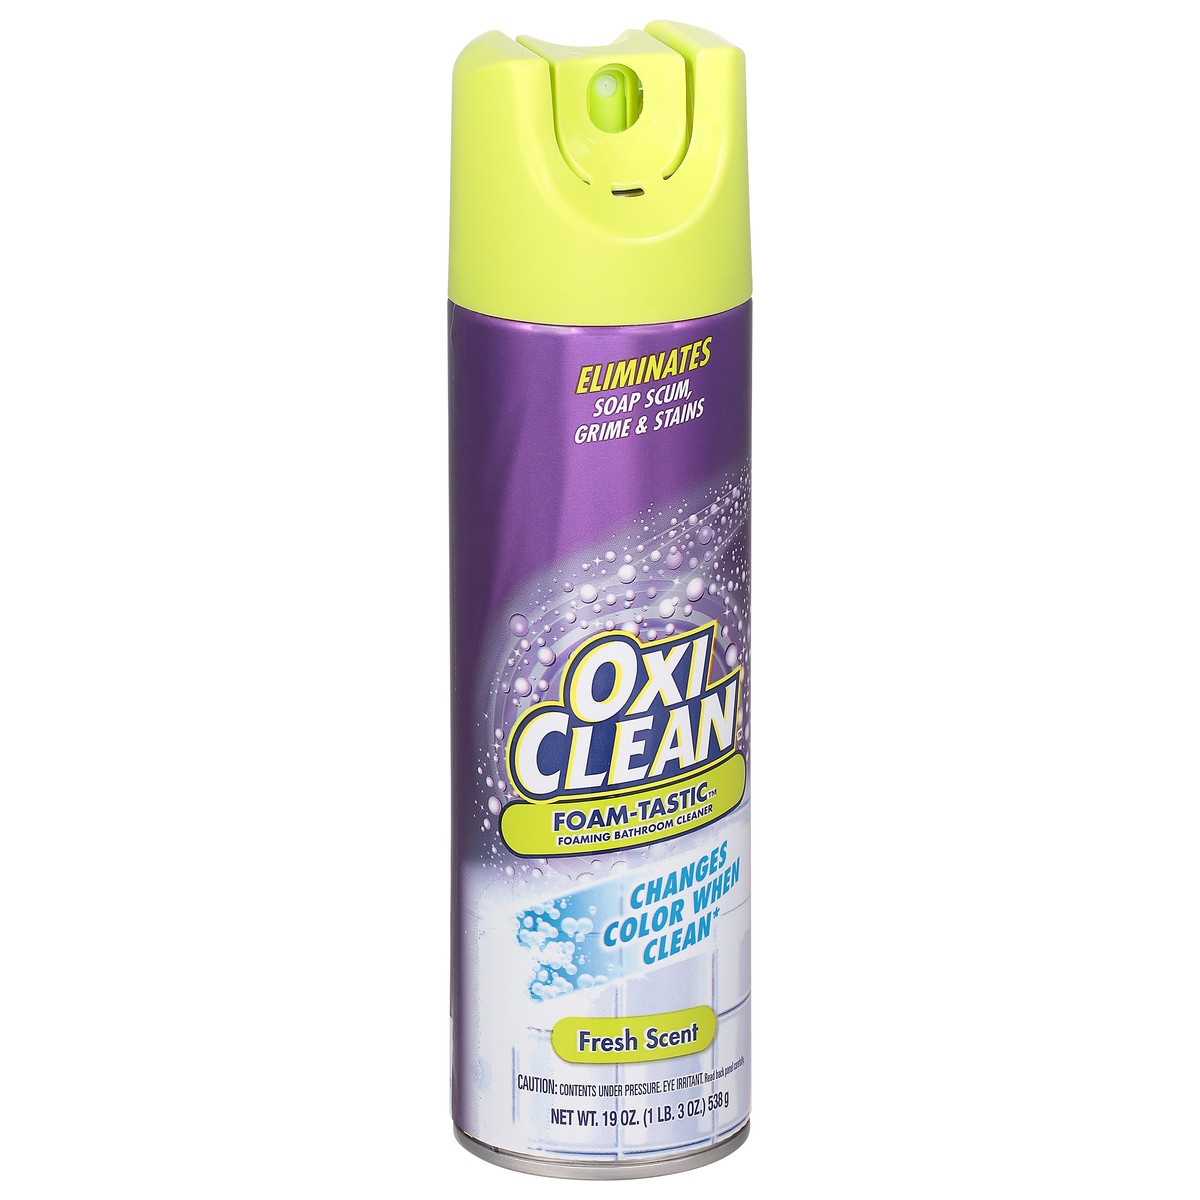 slide 4 of 9, Oxi-Clean Foam-Tastic™ Foaming Bathroom Cleaner, Fresh Scent, 19 oz Spray Can, Eliminates Soap Scum, Grime and Stains, 19 oz